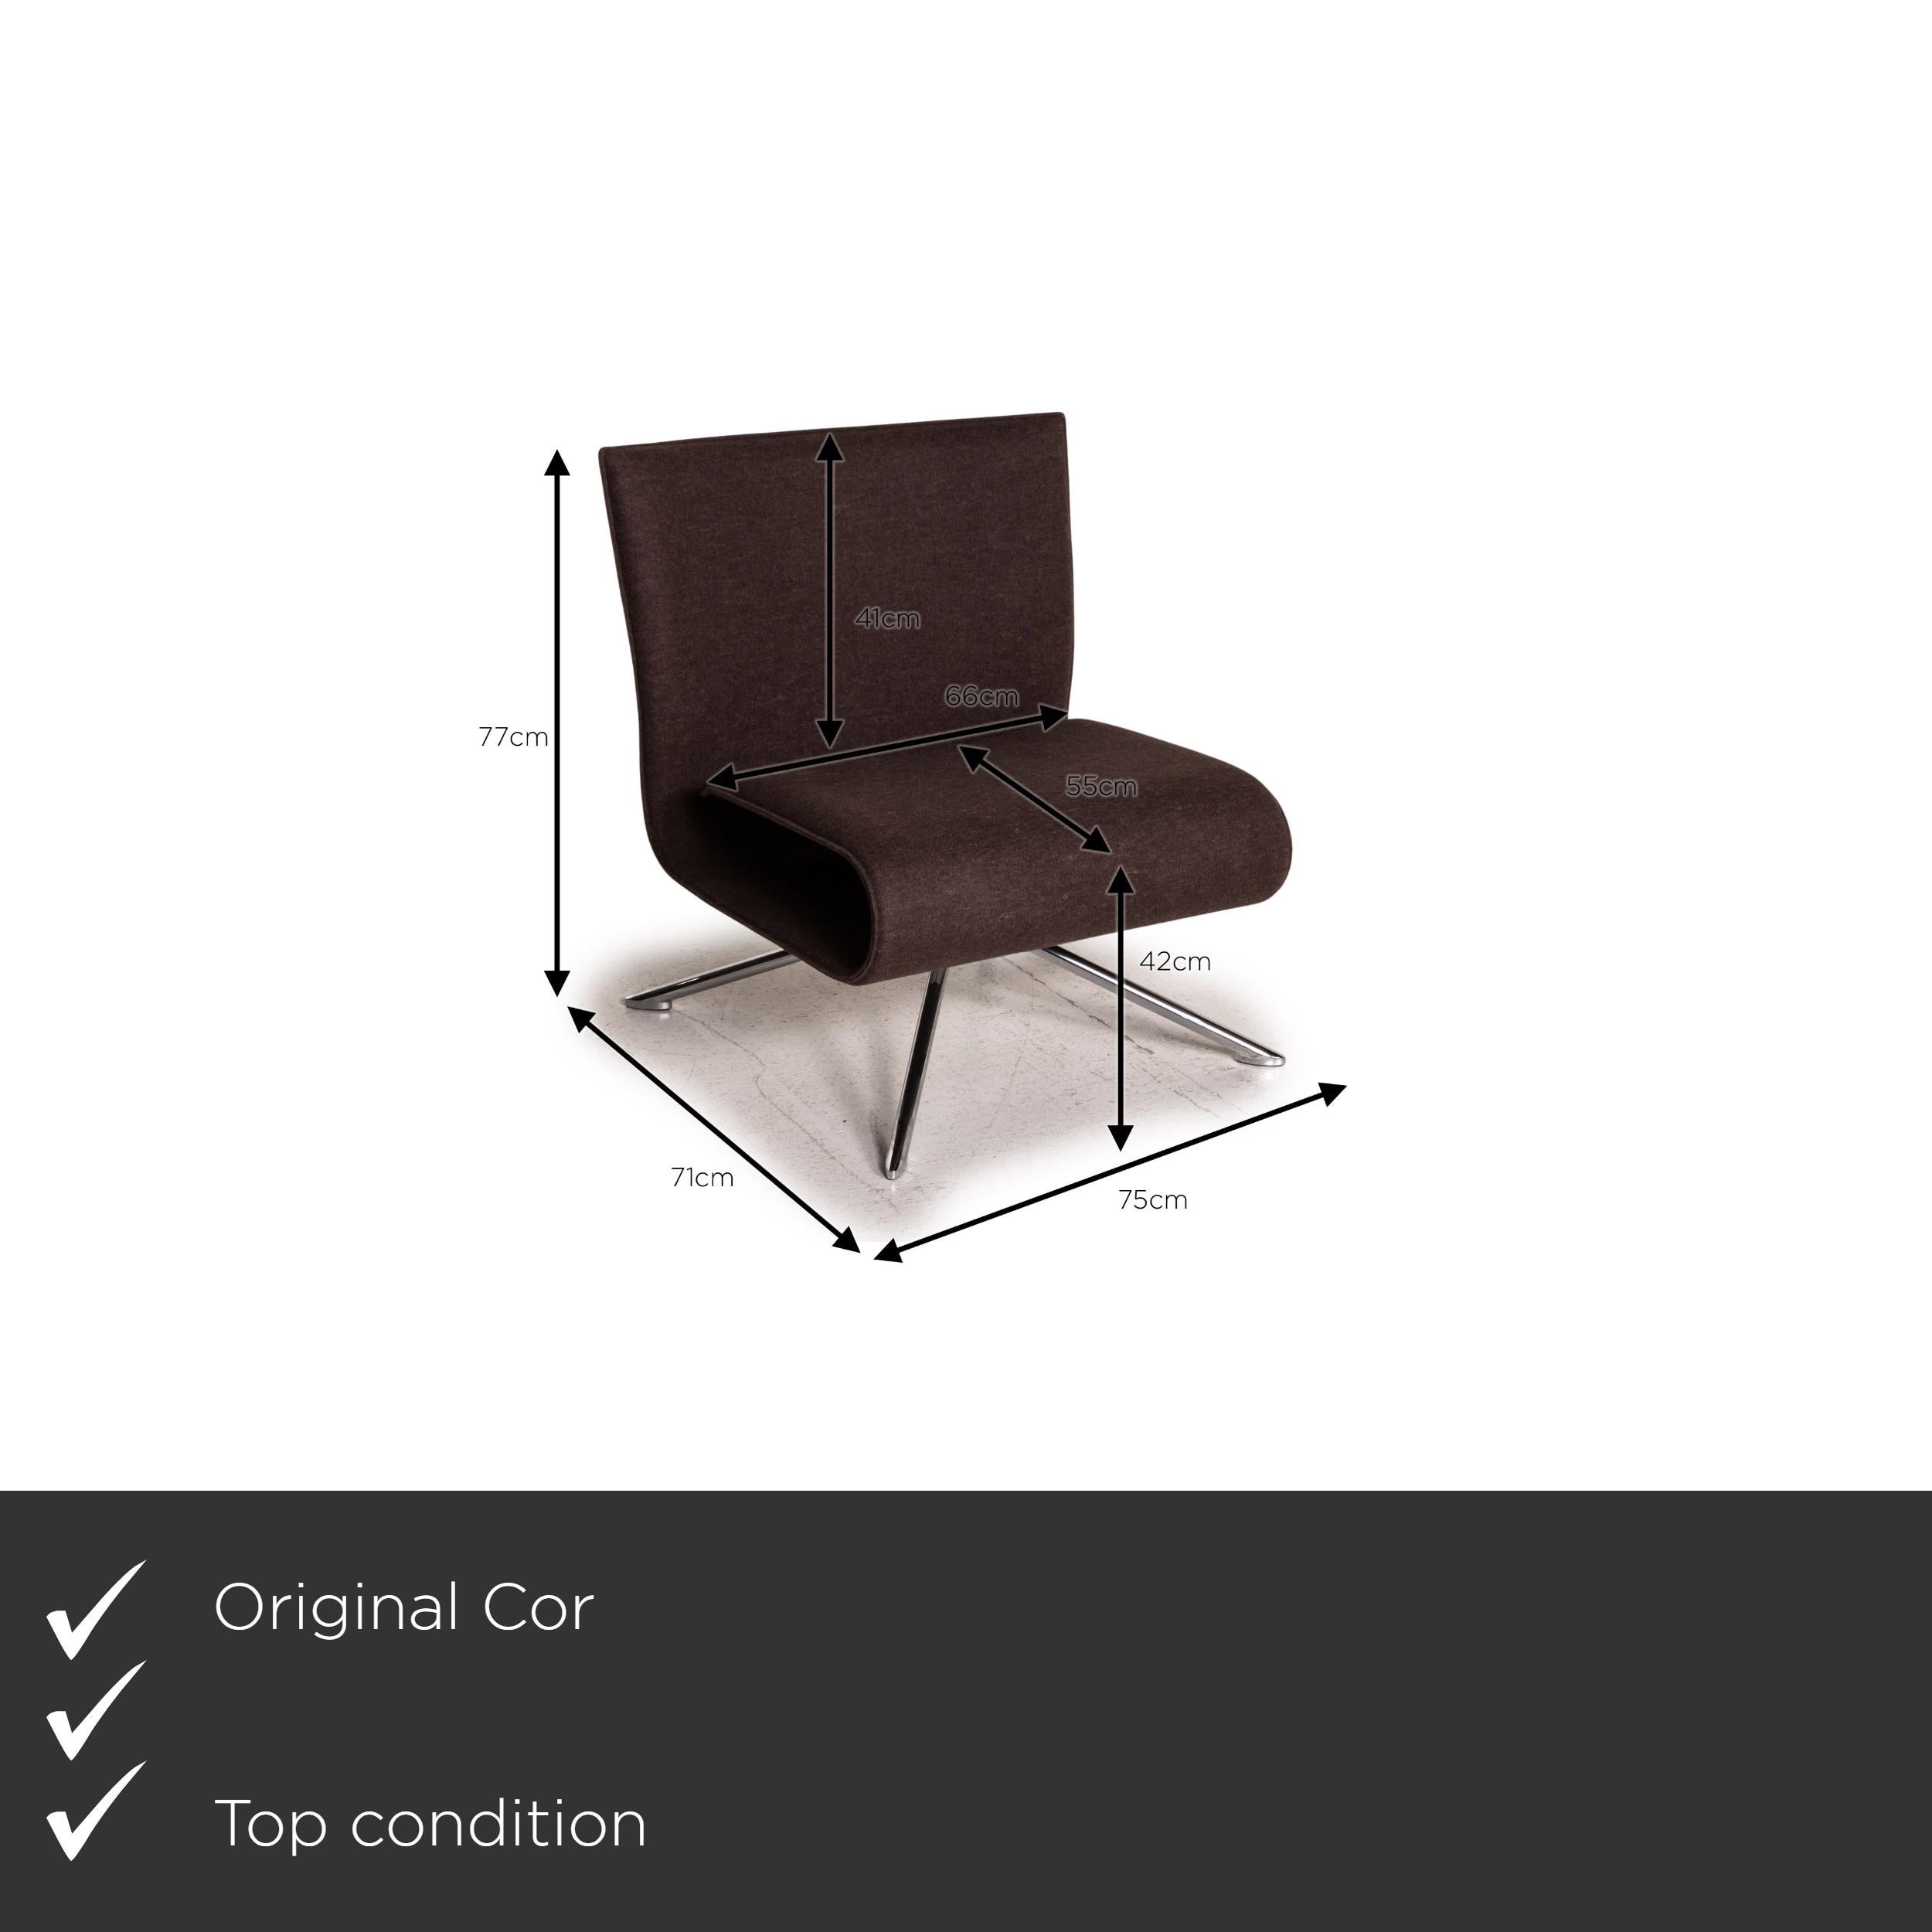 We present to you a HOB Easychair by VERTIJET for COR designer armchair, felt fabric, brown, molded.


 Product measurements in centimeters:
 

Depth: 71
Width: 75
Height: 77
Seat height: 42
Rest height:
Seat depth: 55
Seat width: